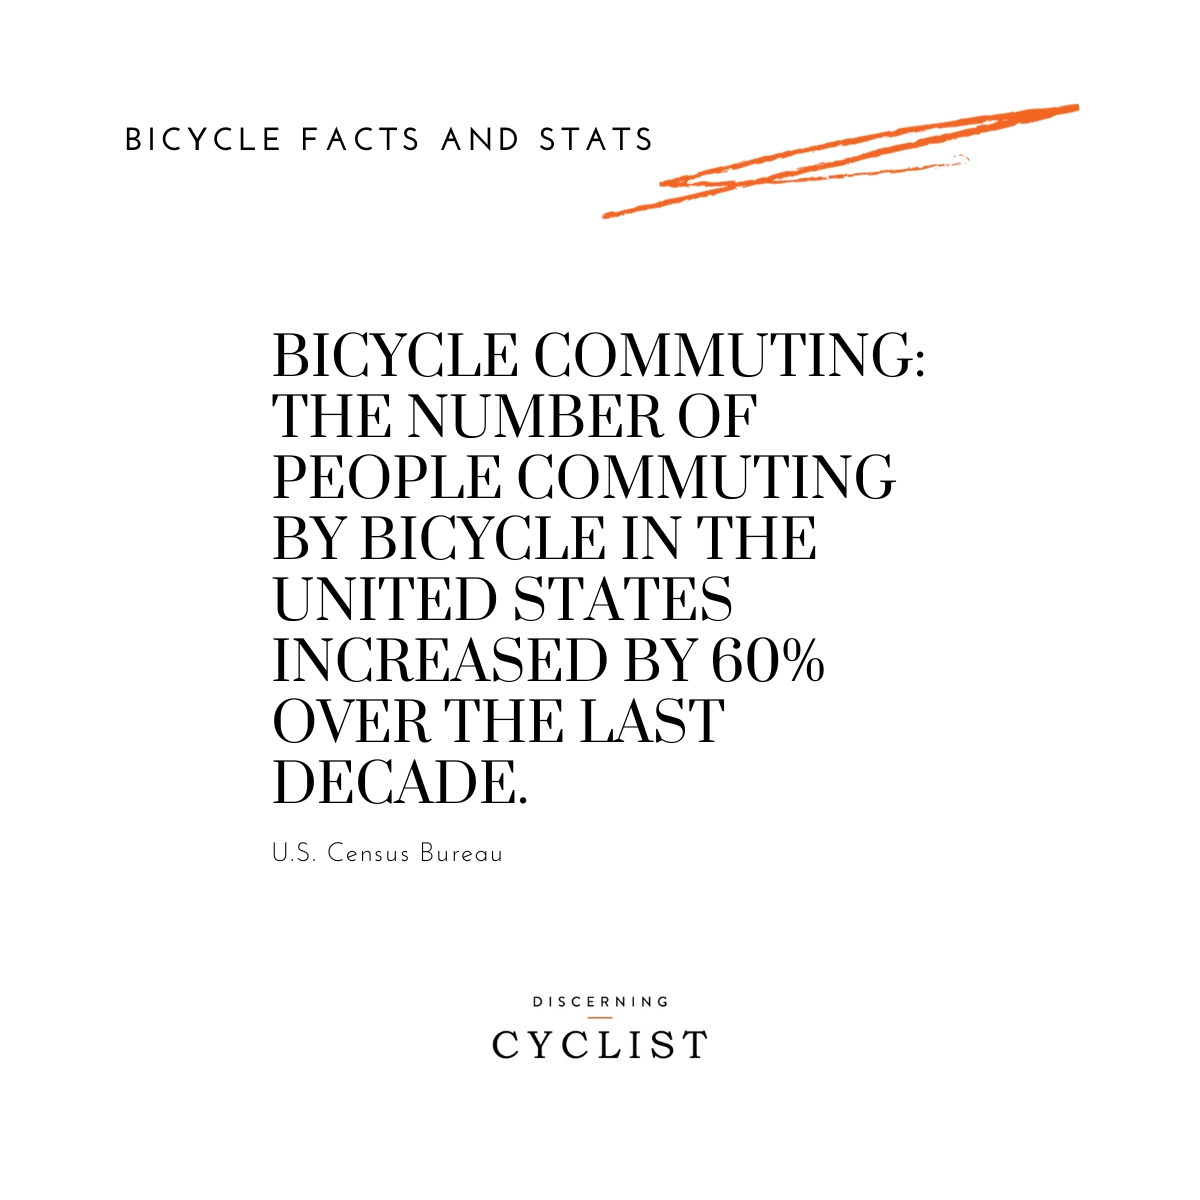 Bicycle Commuting: The number of people commuting by bicycle in the United States increased by 60% over the last decade.